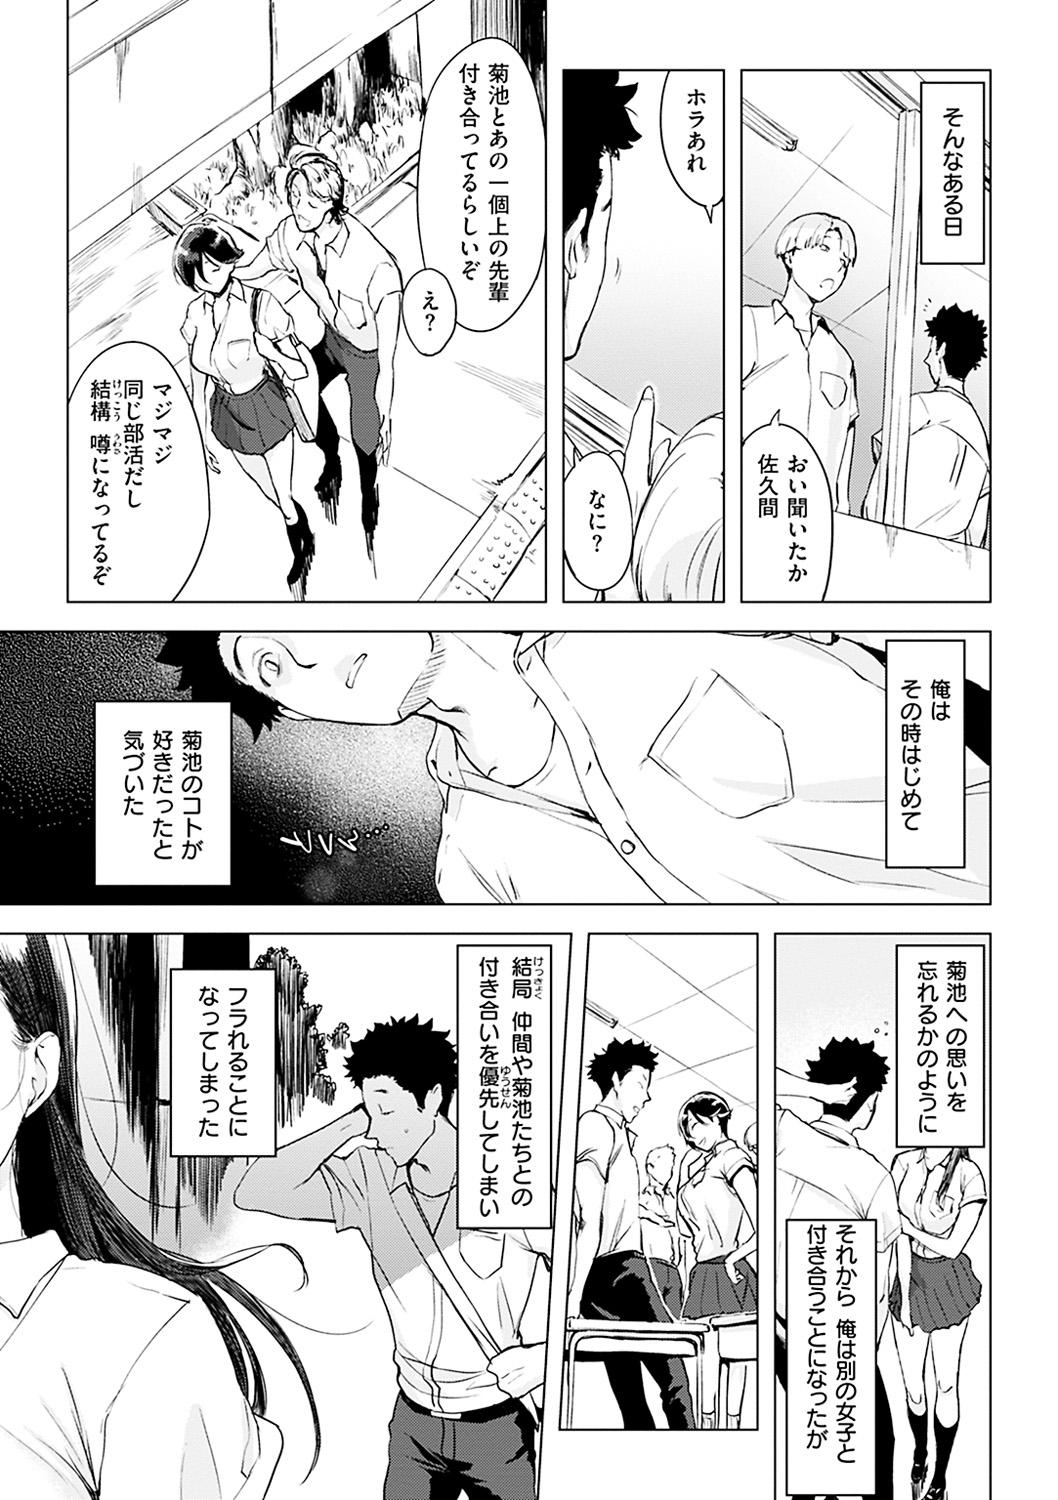 Youporn Tsumi Tsukuri na H - The more immoral sex, the more intensely it burns. Footworship - Page 7